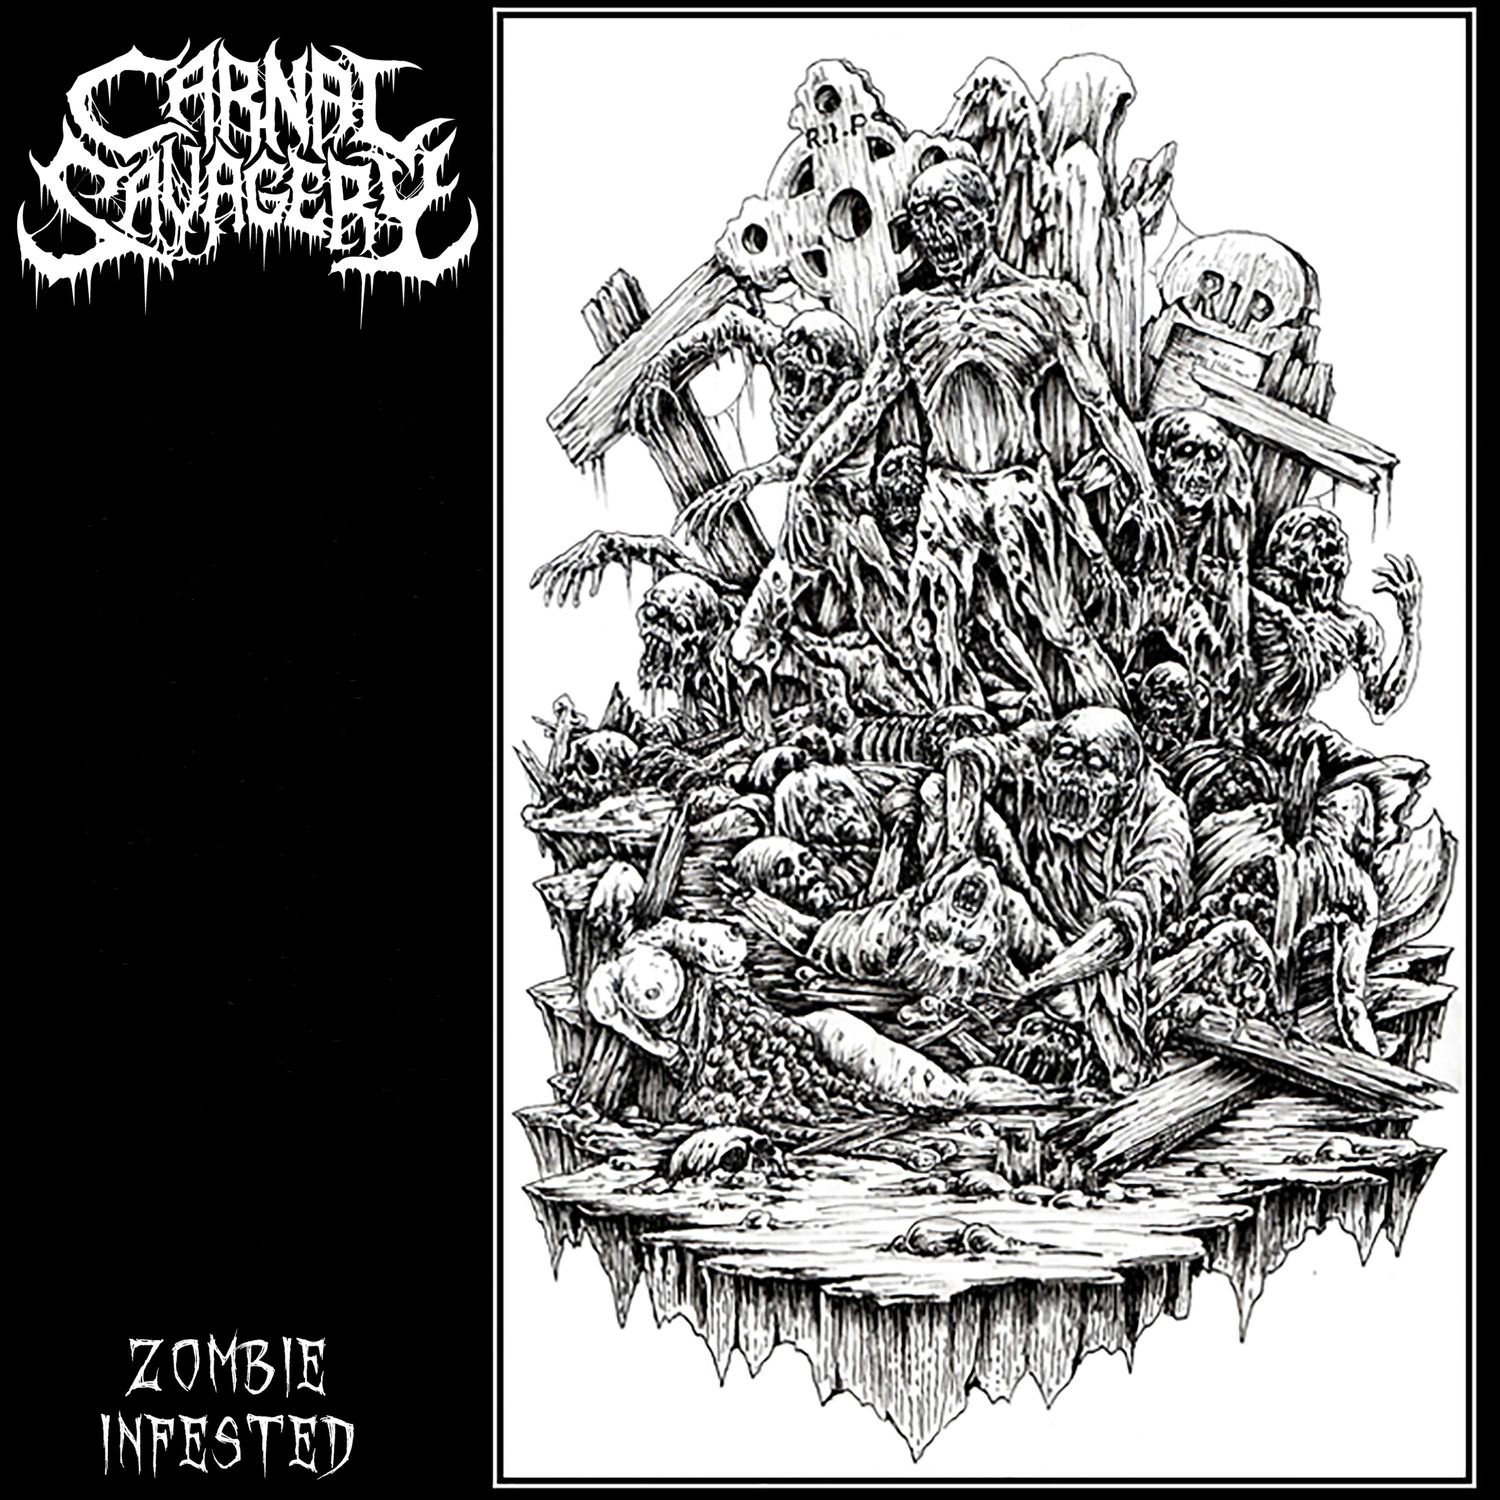 Zombies demo. Carnal savagery "into the abysmal Void" сингл.